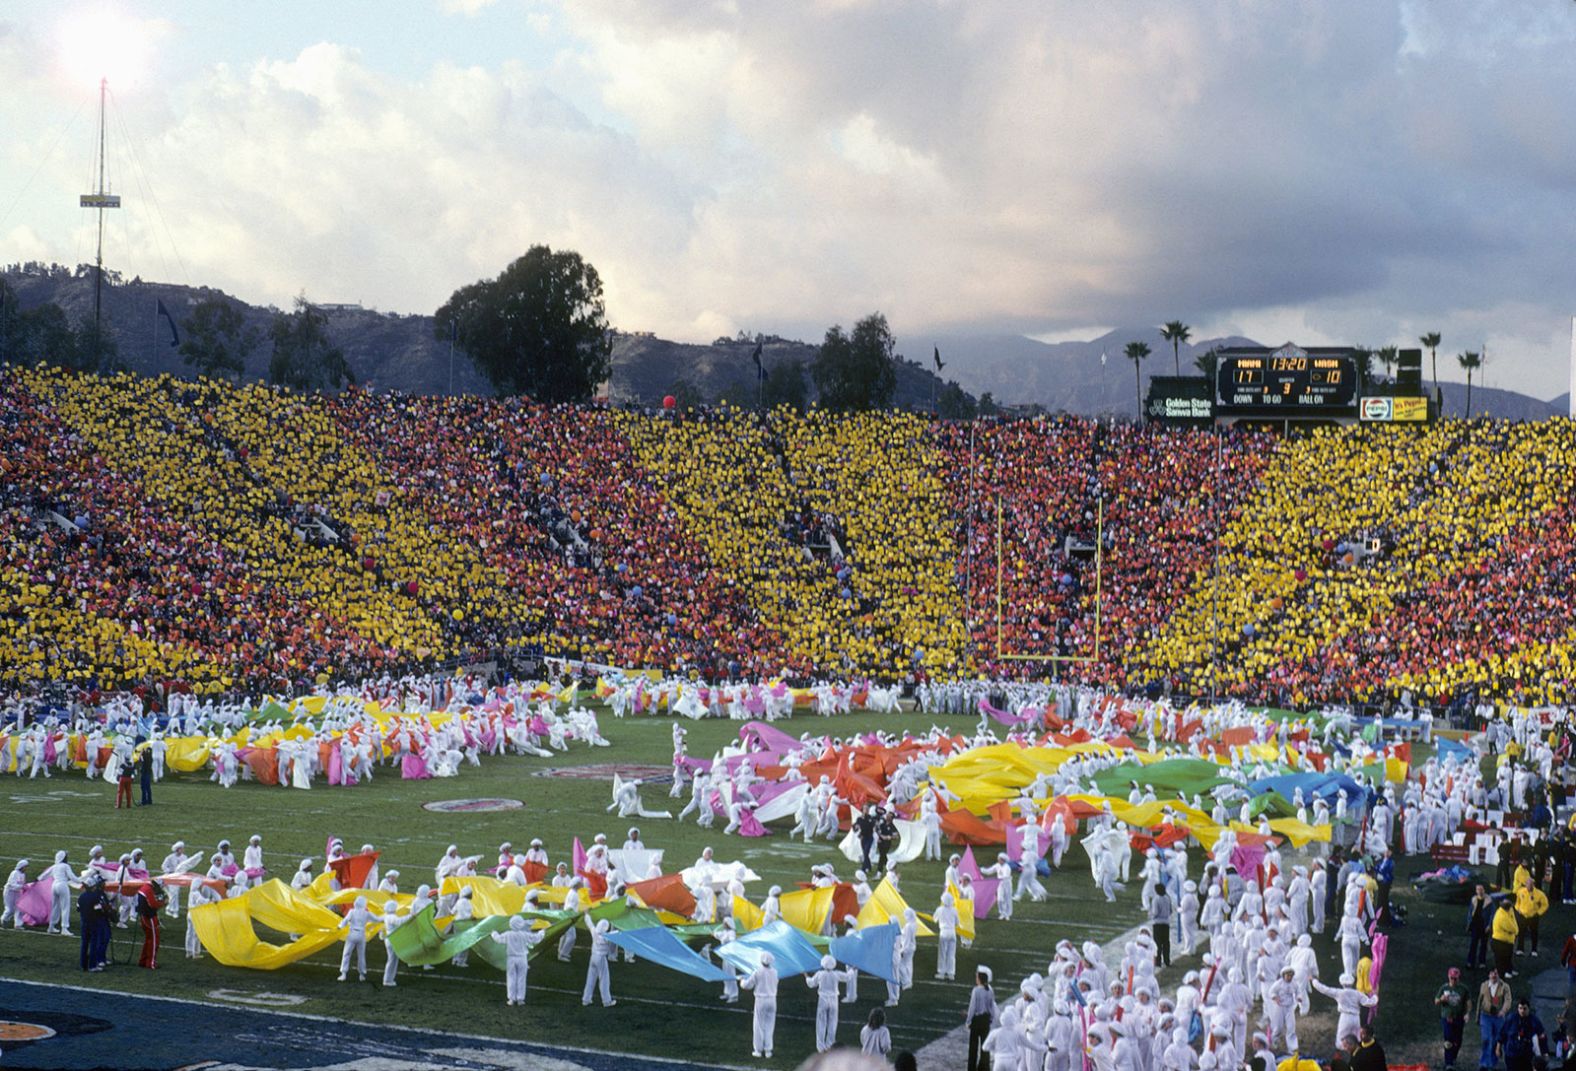 The crowd contributes a colorful background to the Super Bowl halftime show in 1983, which was held at the Rose Bowl in Pasadena, California.